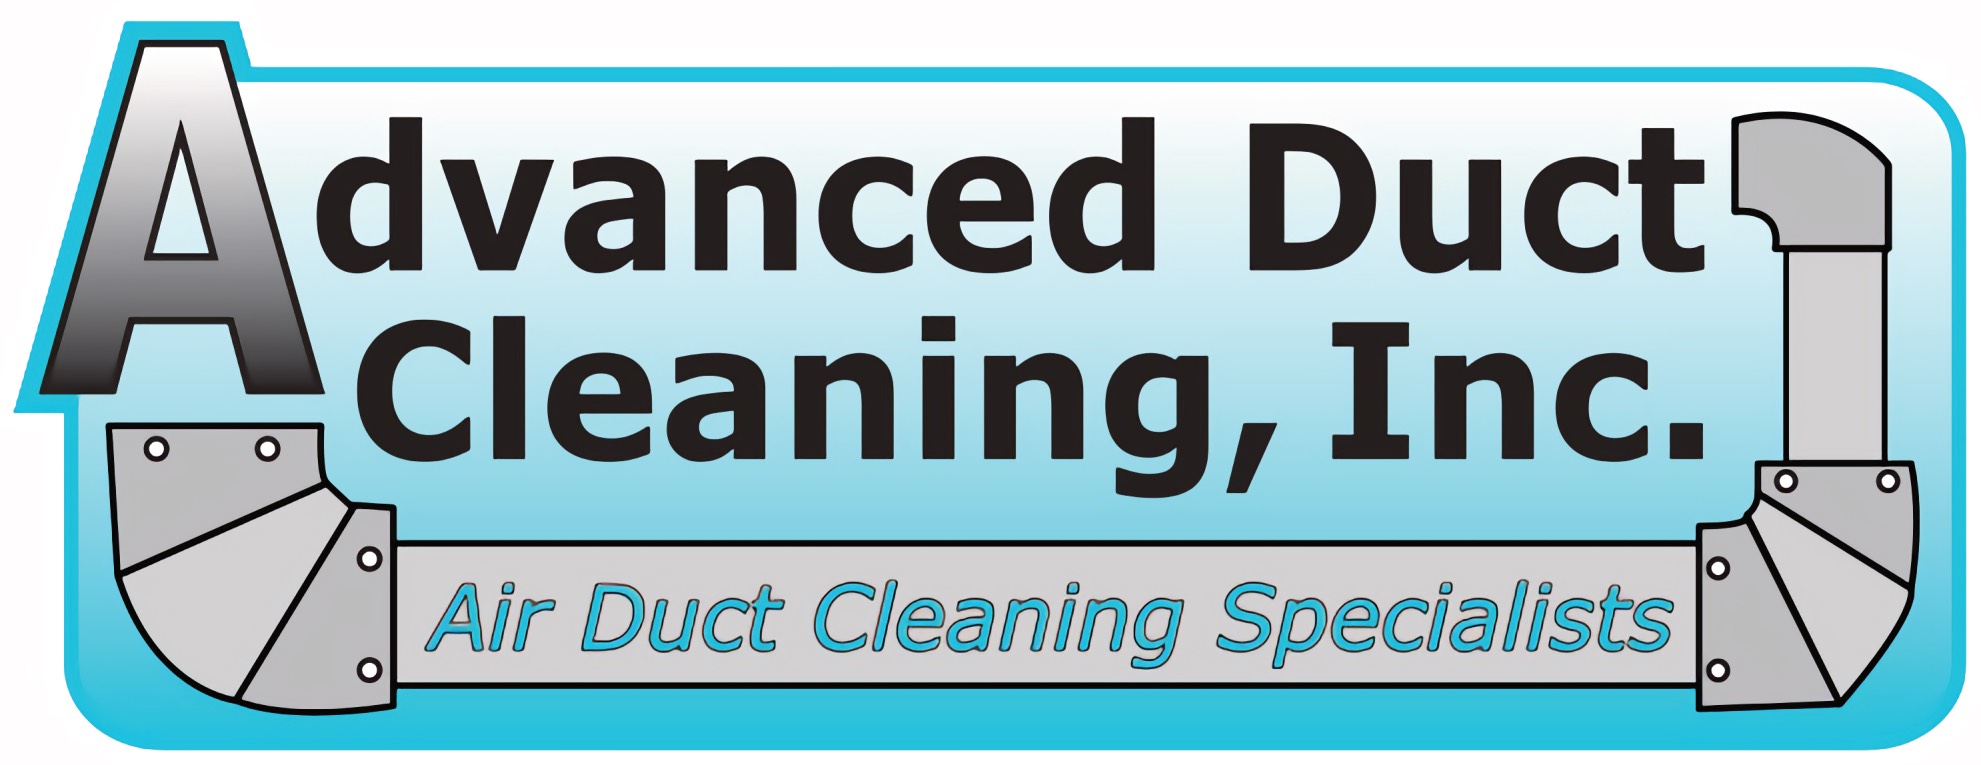 Advanced Duct Cleaning Logo